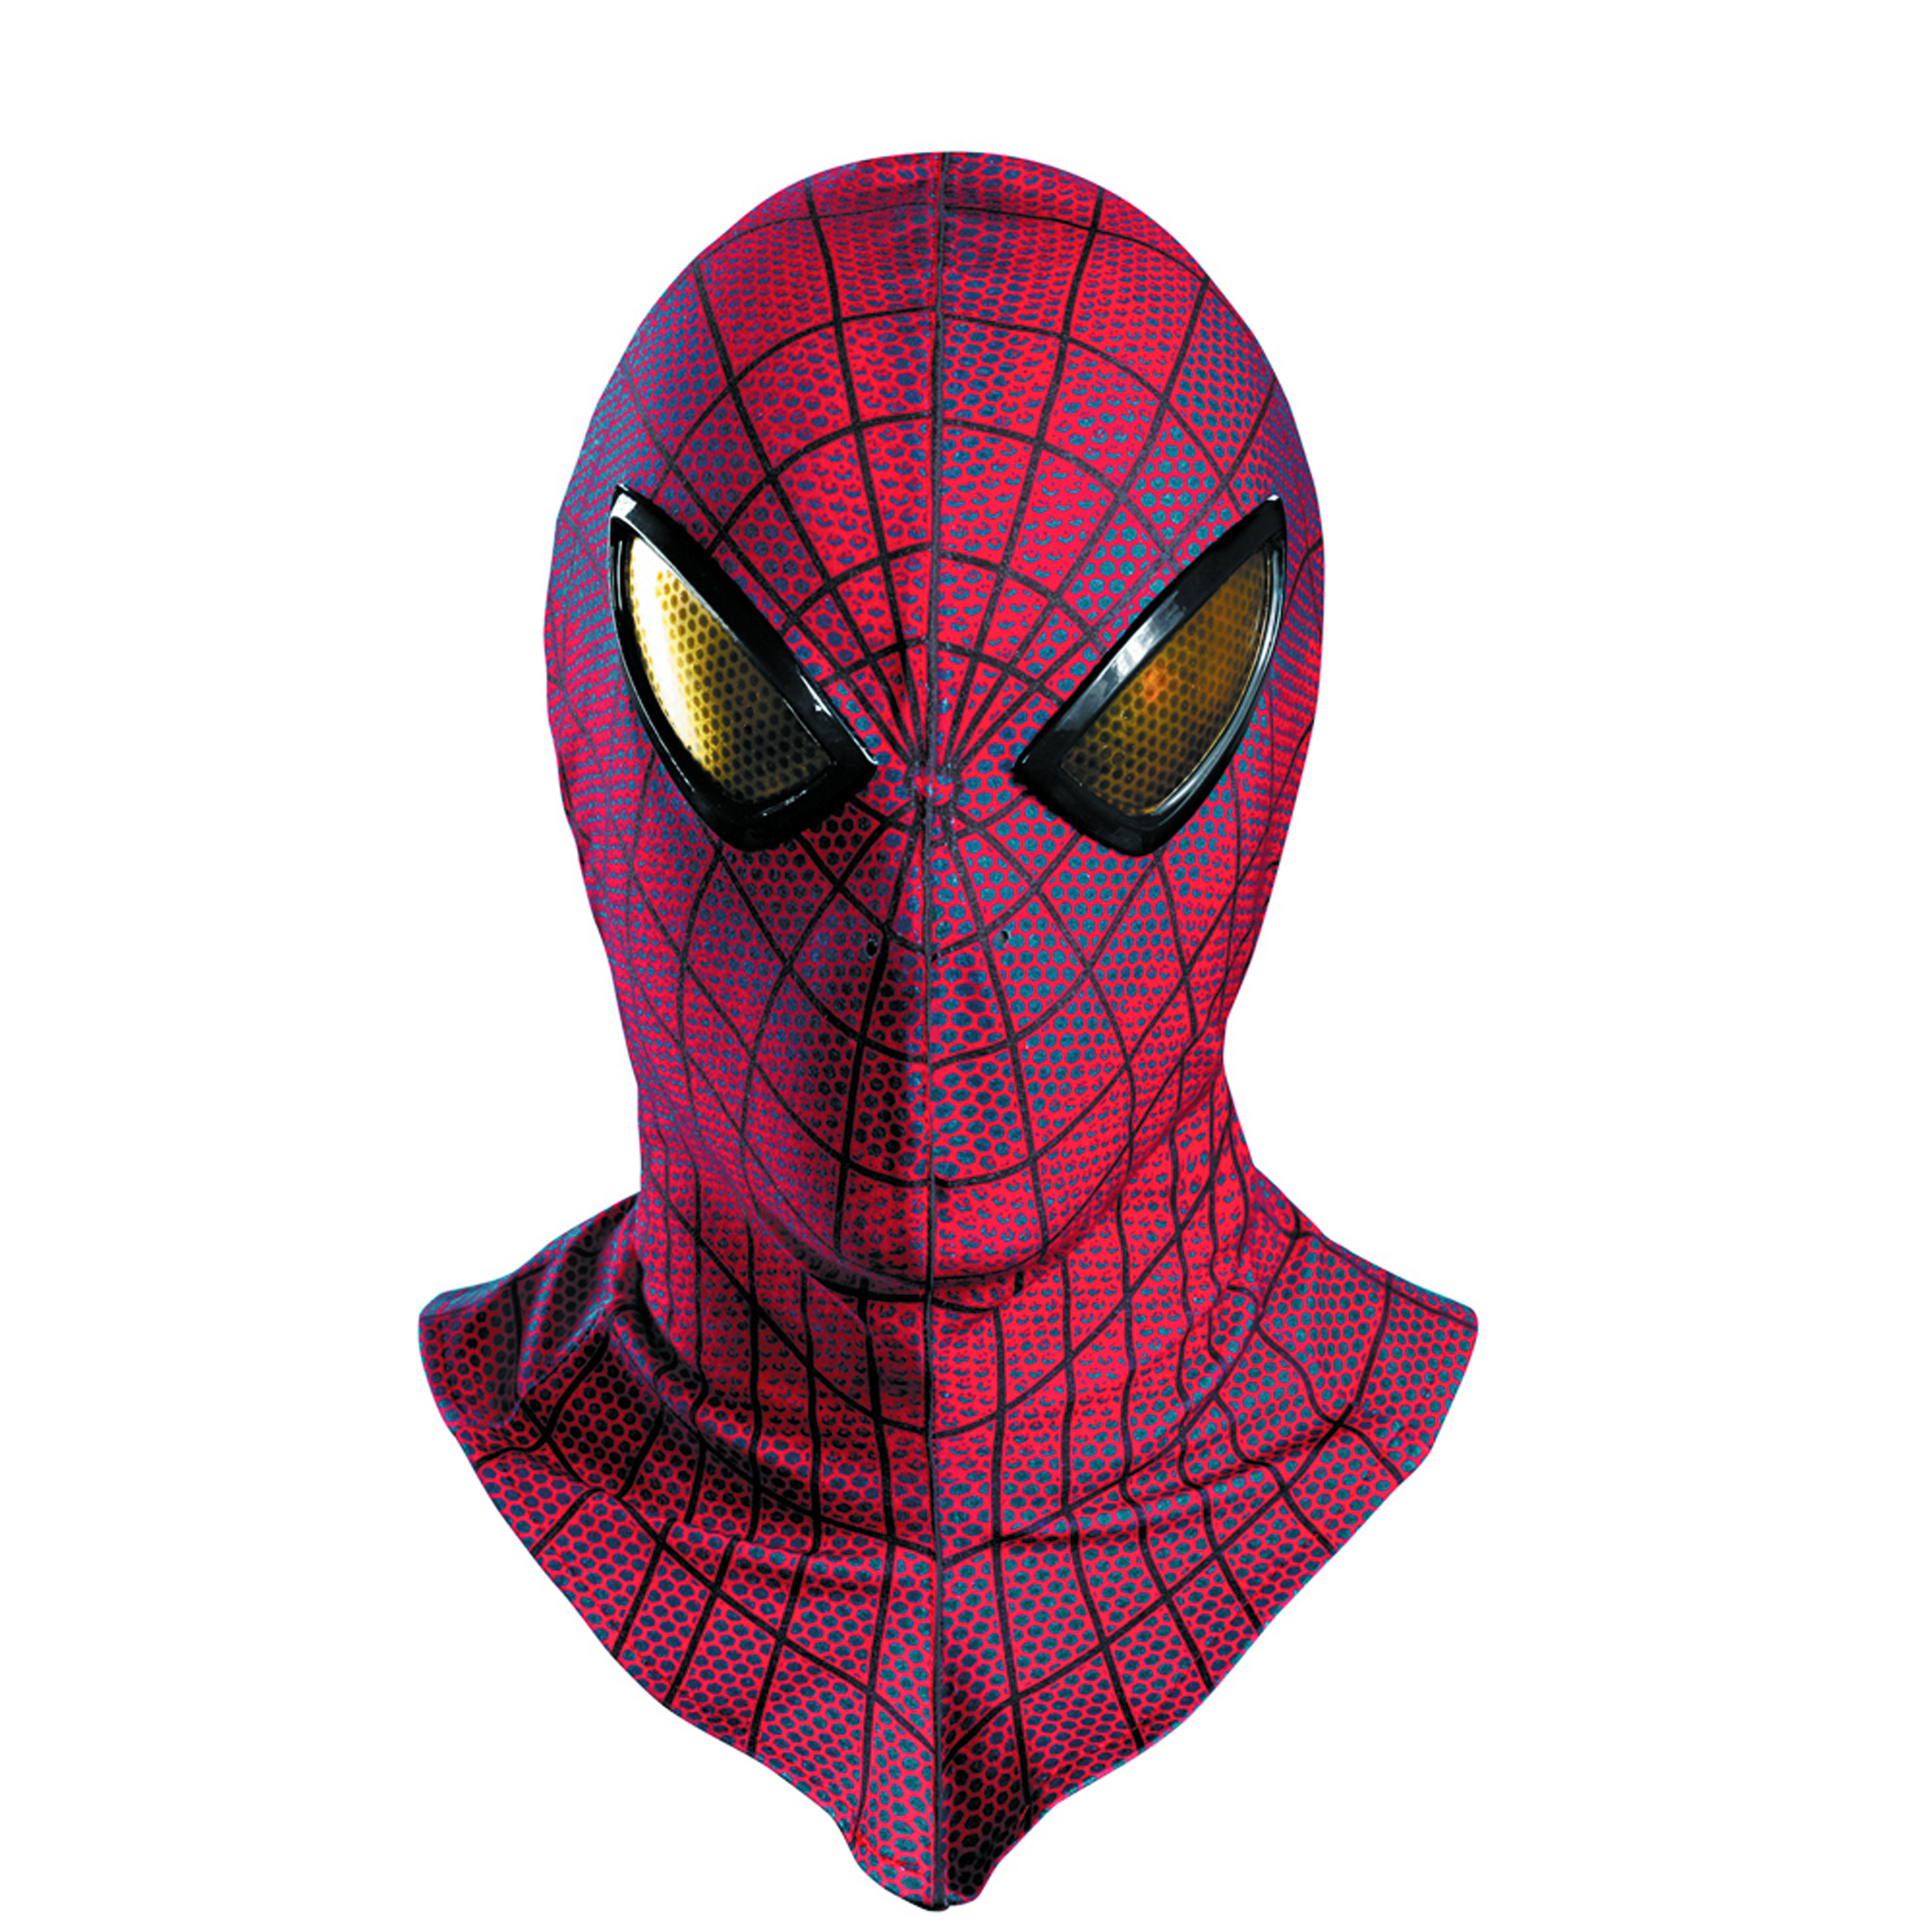 JUL121652 - AMAZING SPIDER-MAN ADULT DELUXE MASK - Previews World